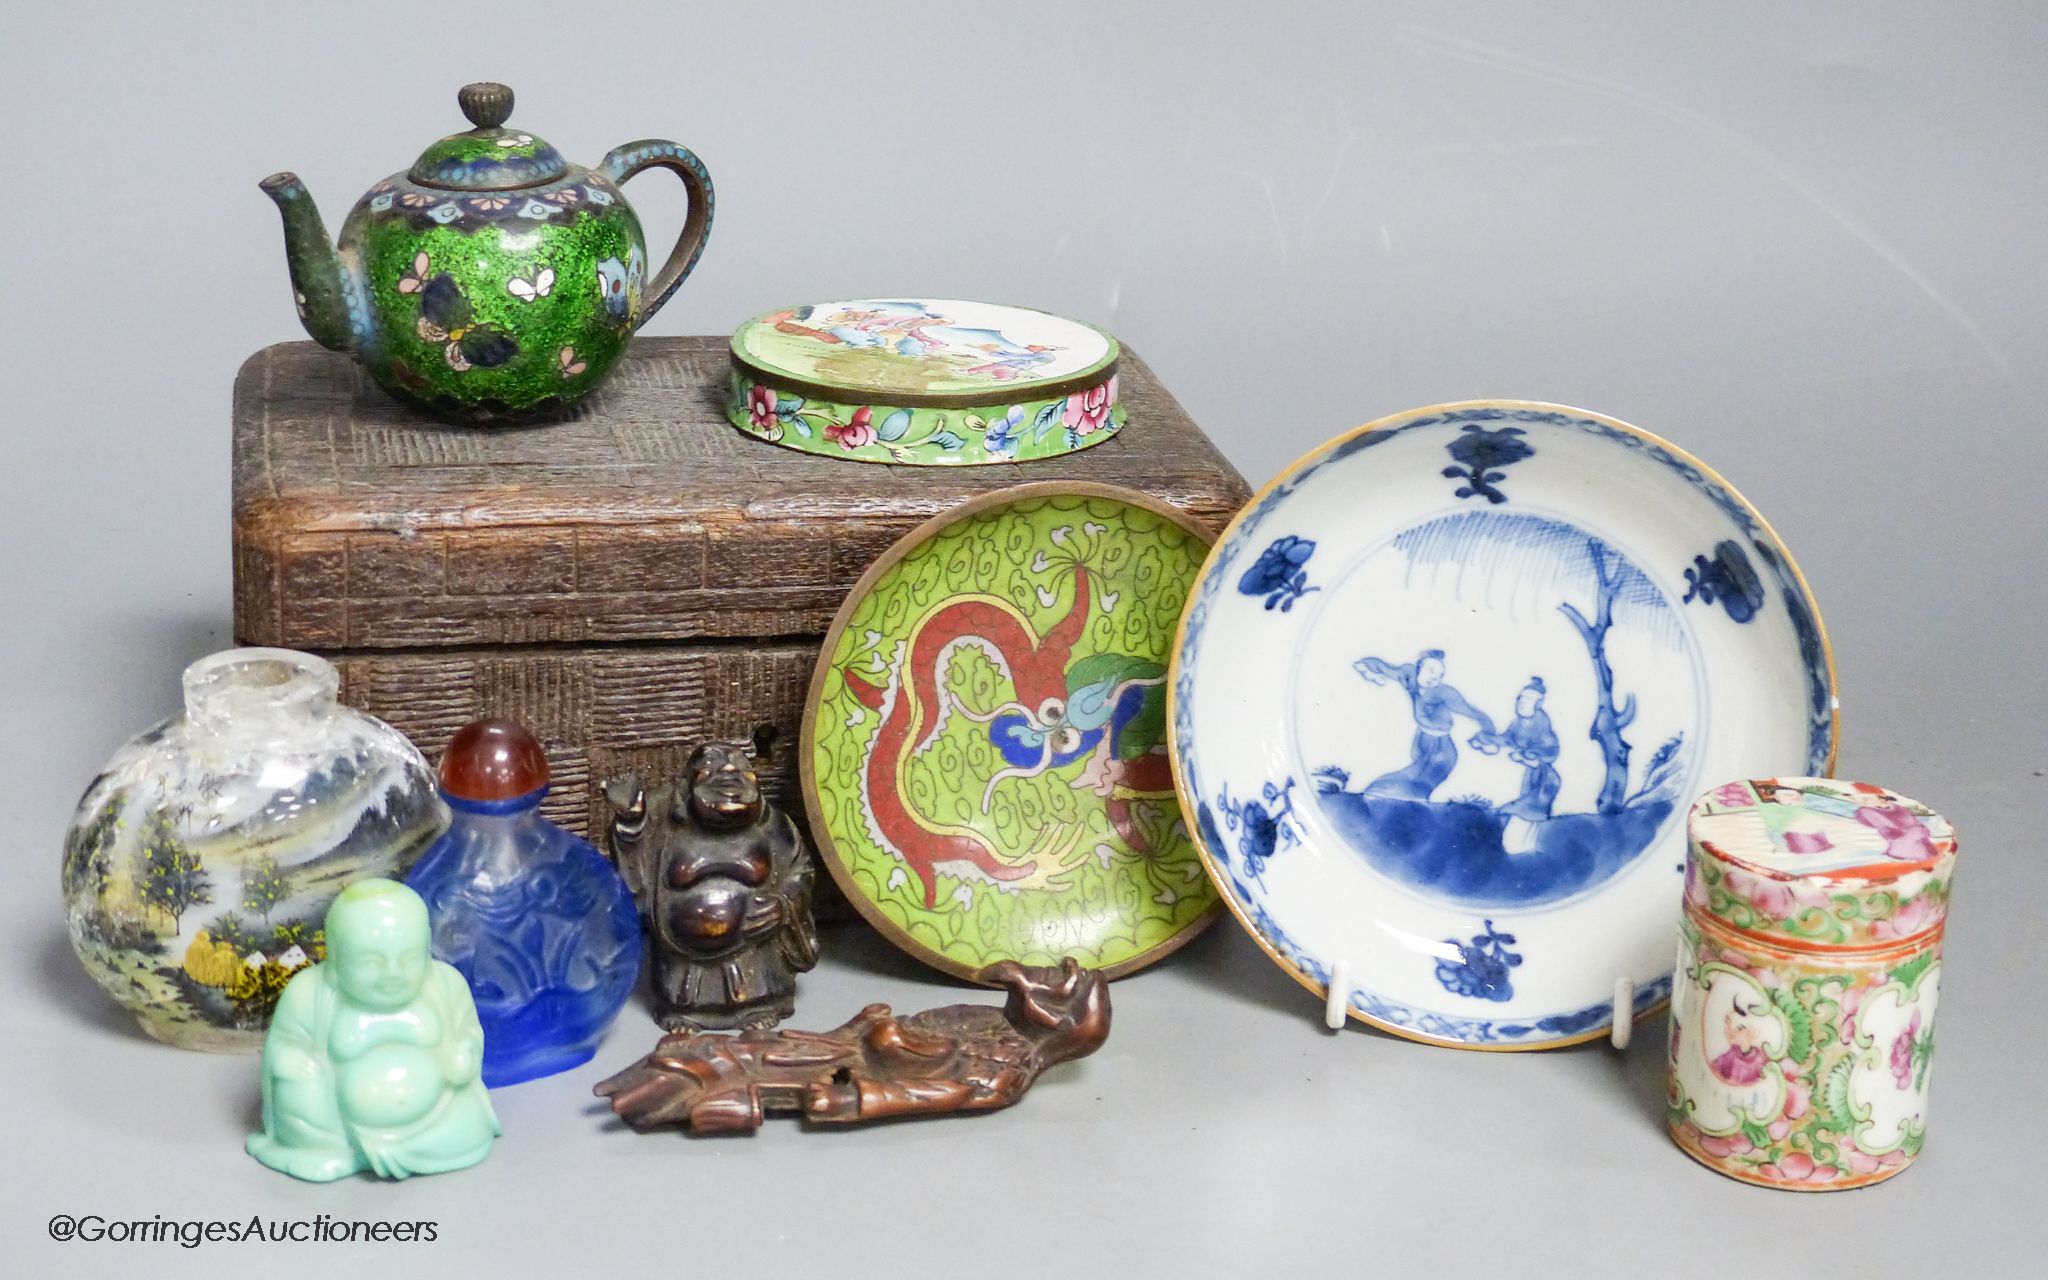 A small miscellaneous Oriental collection including enamel snuff boxes, Buddha carvings etc.